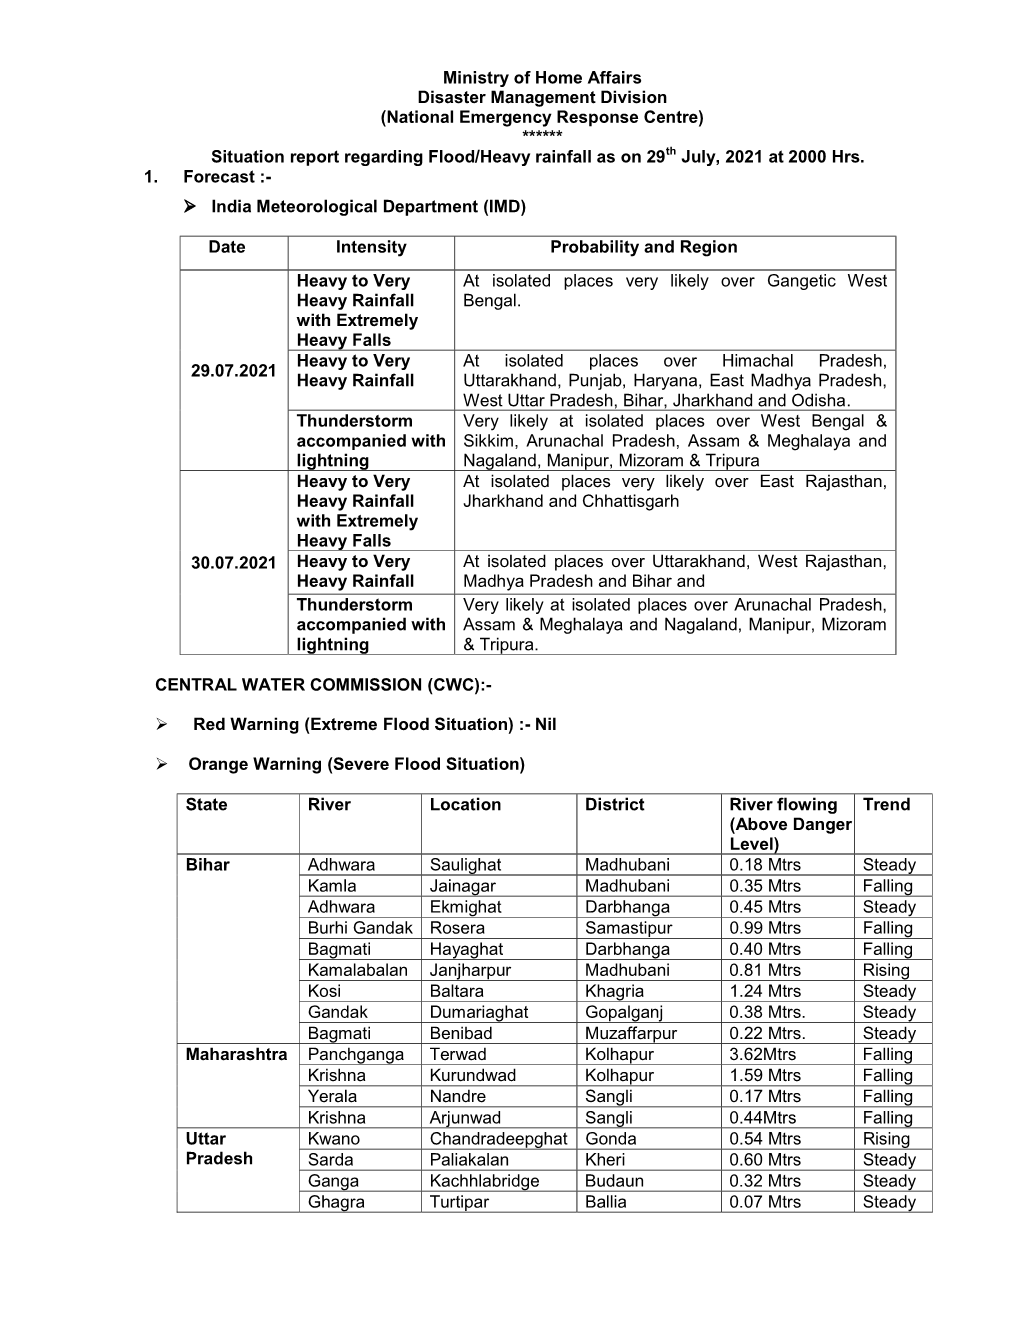 Situation Report Regarding Flood/Heavy Rainfall As on 29Th July, 2021 at 2000 Hrs